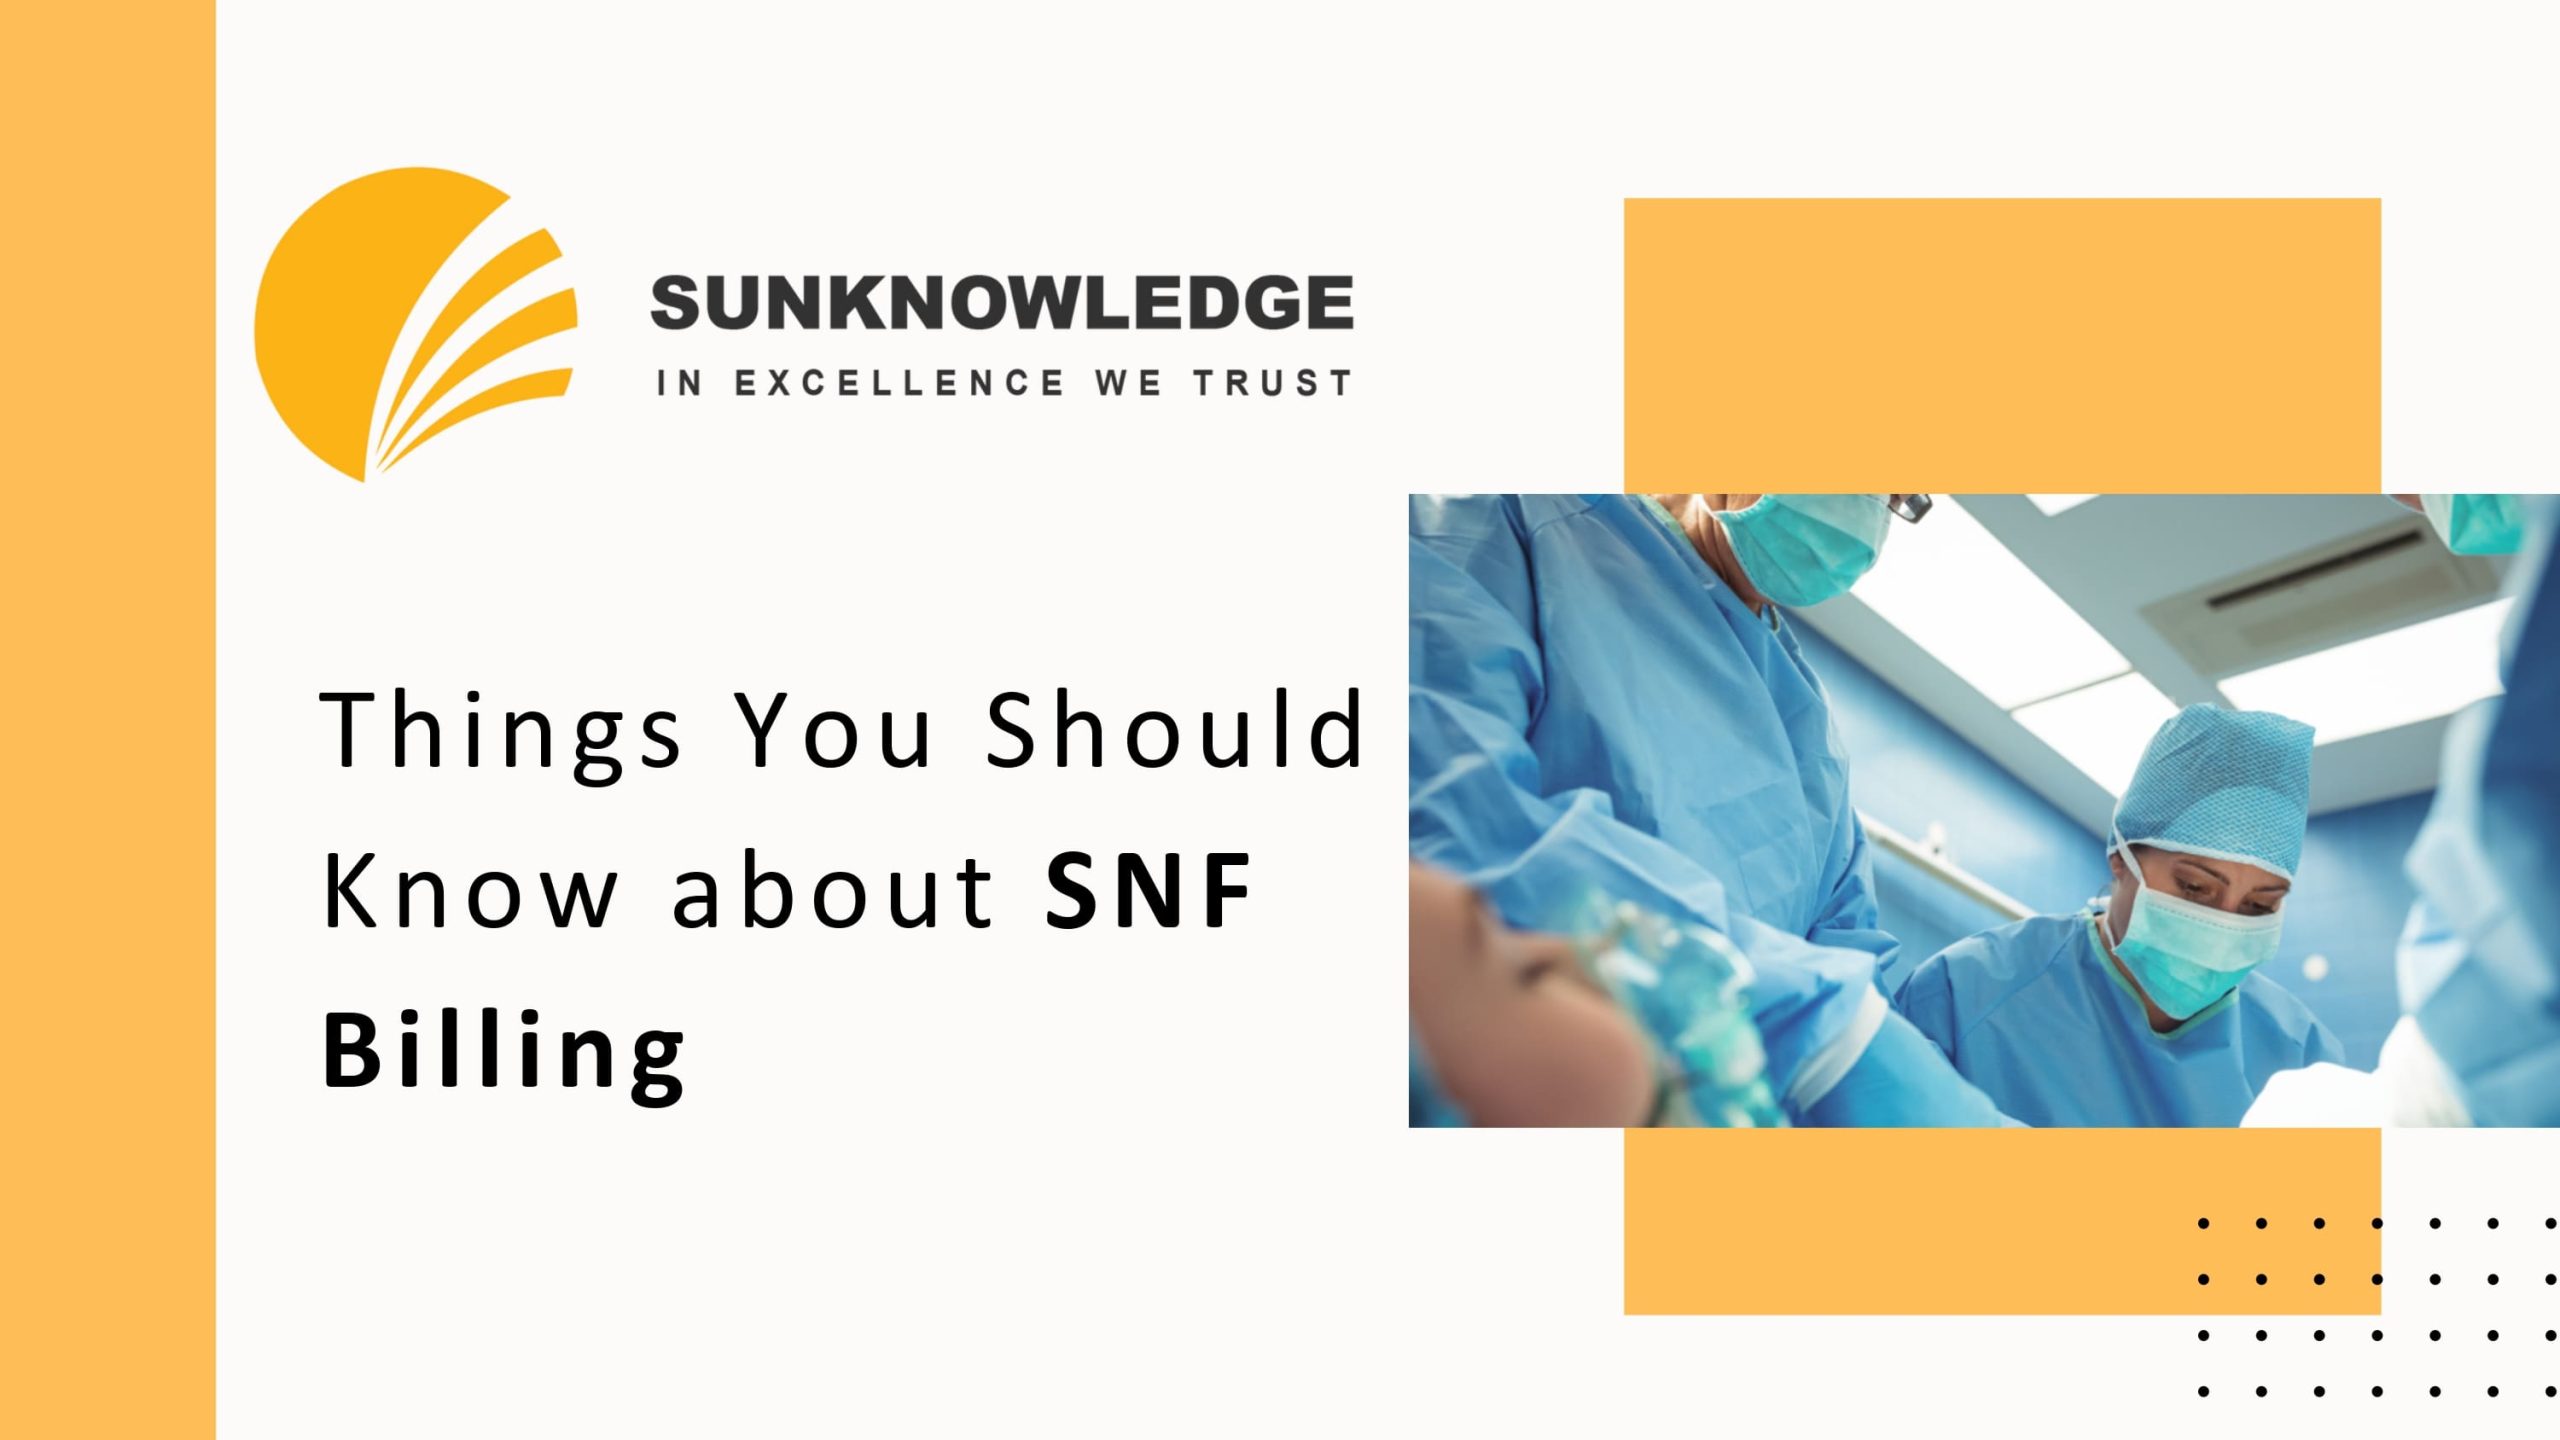 Things You Should Know about SNF Billing (1)